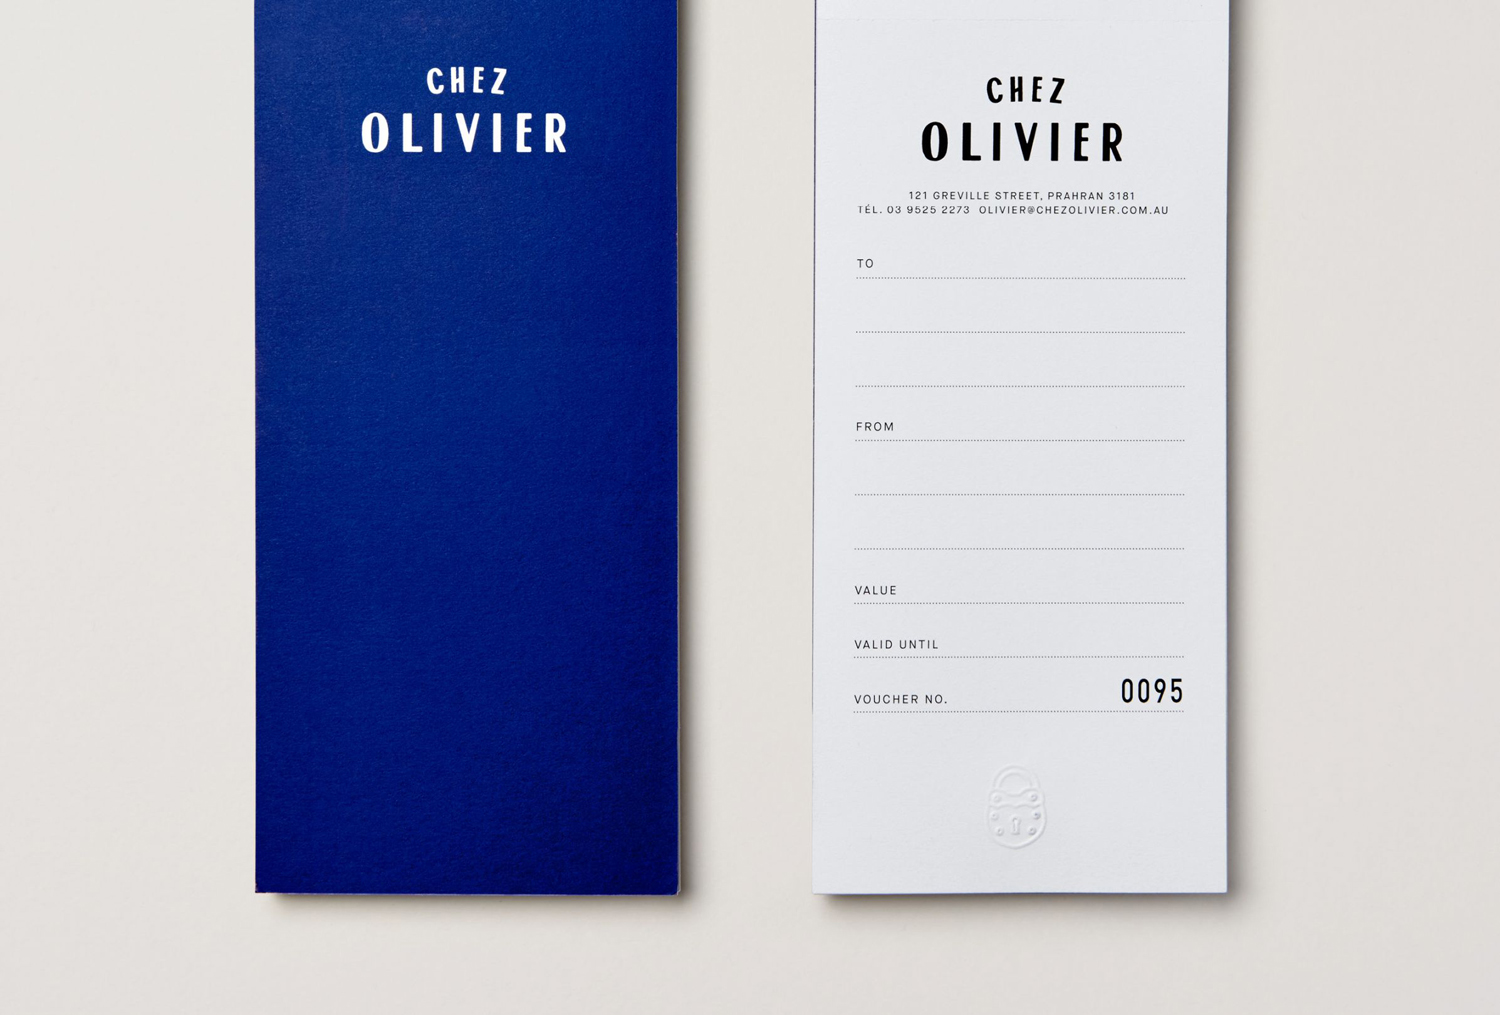 Logo, menus and business cards designed by Swear Words for Melbourne-based French bistro Chez Olivier.